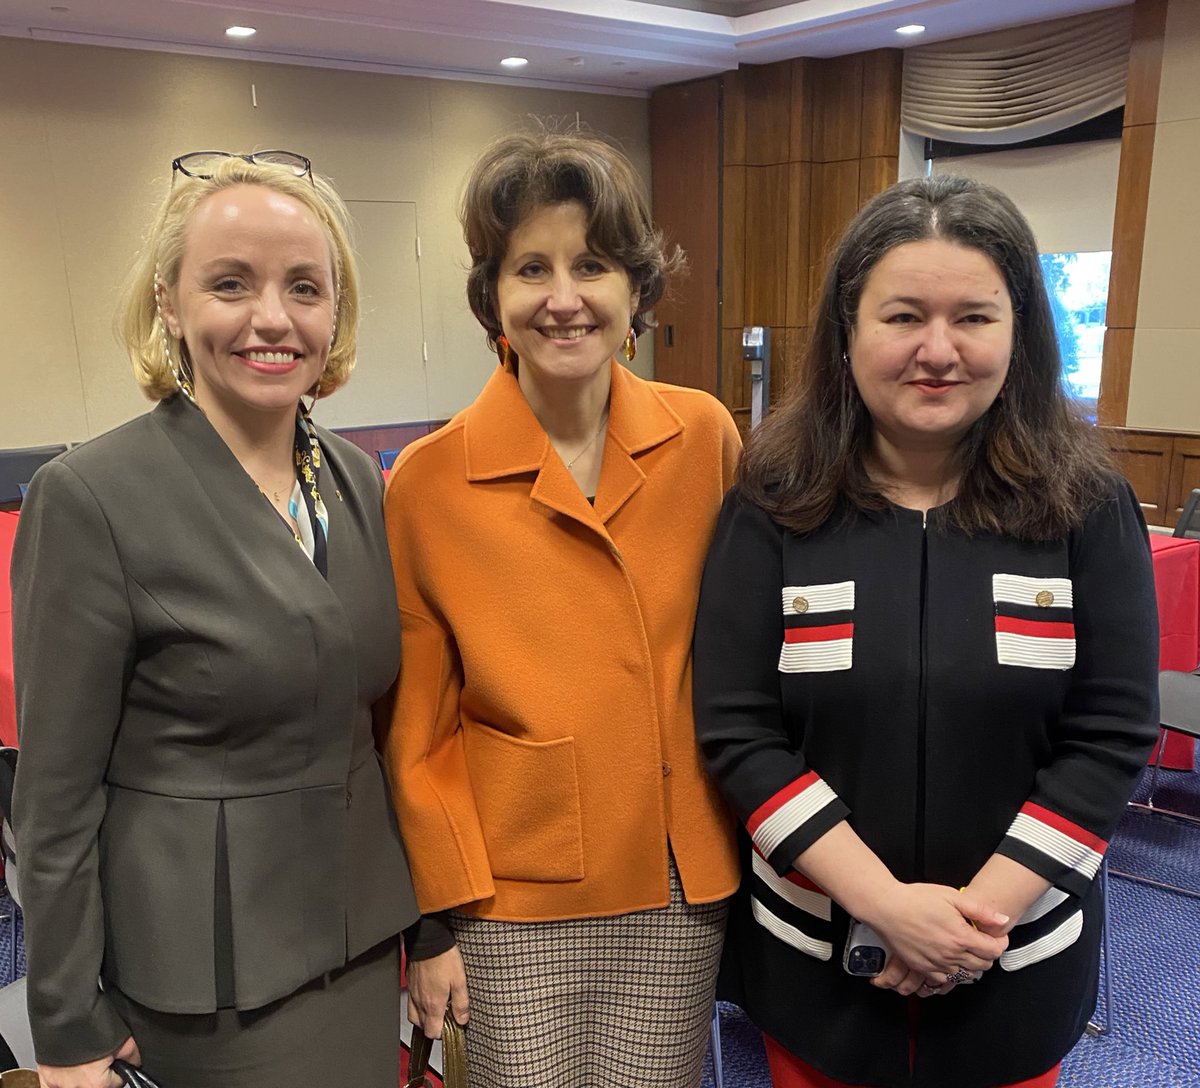 Accountability and the need for Special Tribunal for #CrimeofAggression in great discussion w/ @DemWomenCaucus members
@SpeakerPelosi @RepLoisFrankel @DeborahRossNC @RepMGS @sydneykamlager & fellow 🇦🇲🇦🇱🇸🇪🇺🇦🇯🇲ambassadors @OMarkarova 

Visit of 🇱🇹 Justice Viceminister G. Daugirde